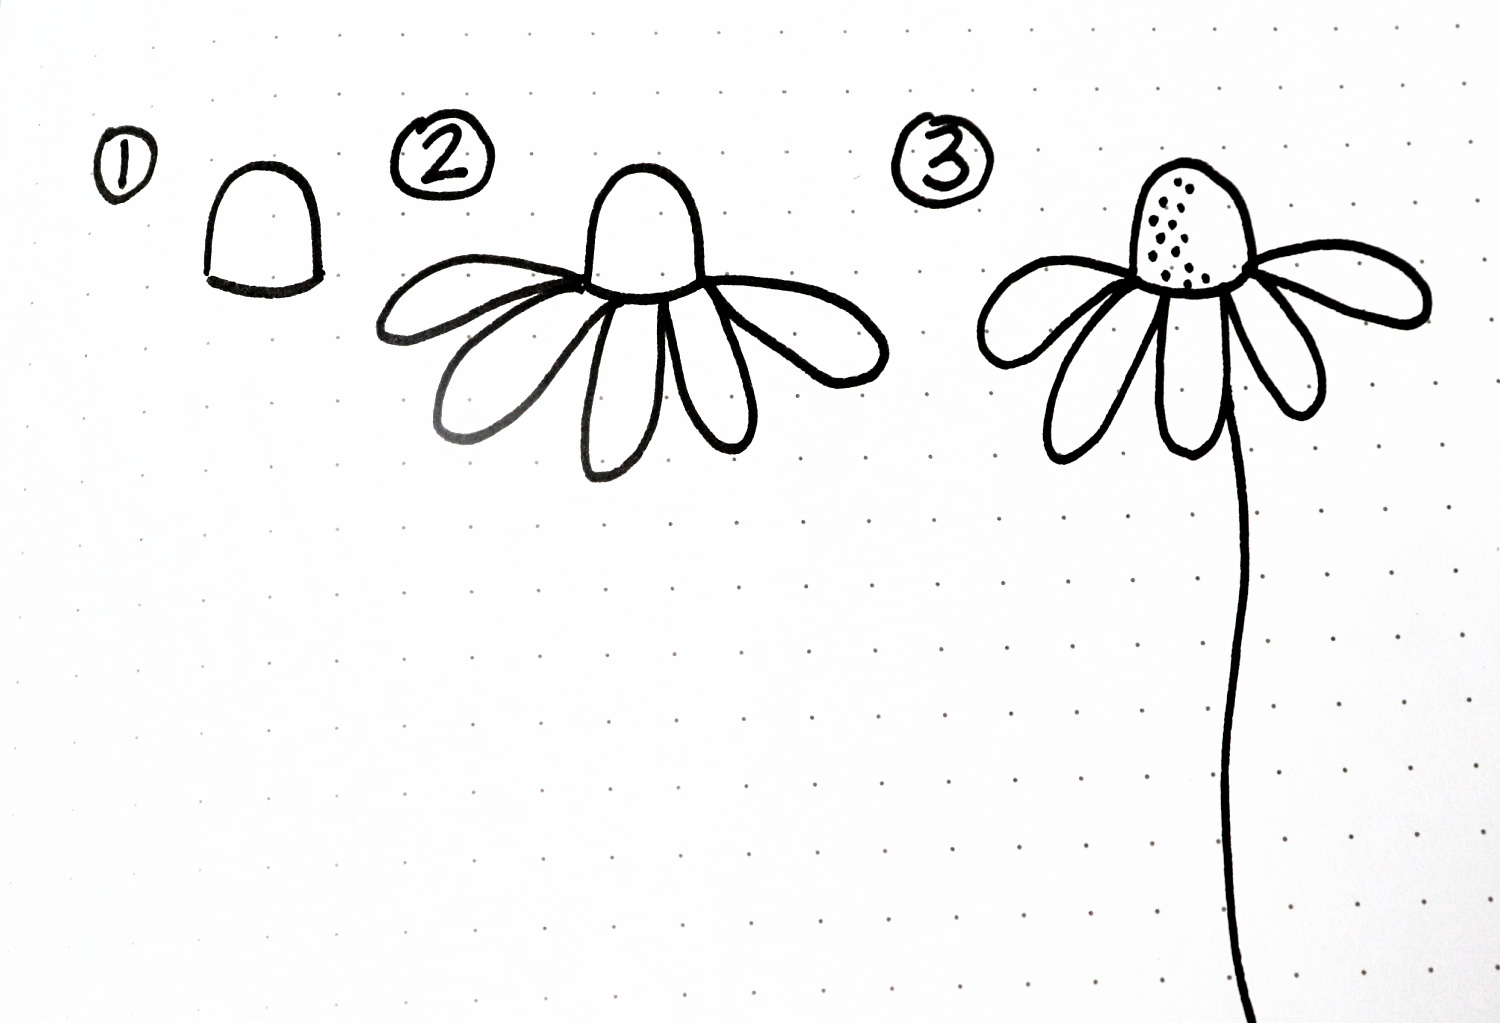 Image is a step-by-step diagram for how to draw a daisy in three steps, as explained in the written instructions.